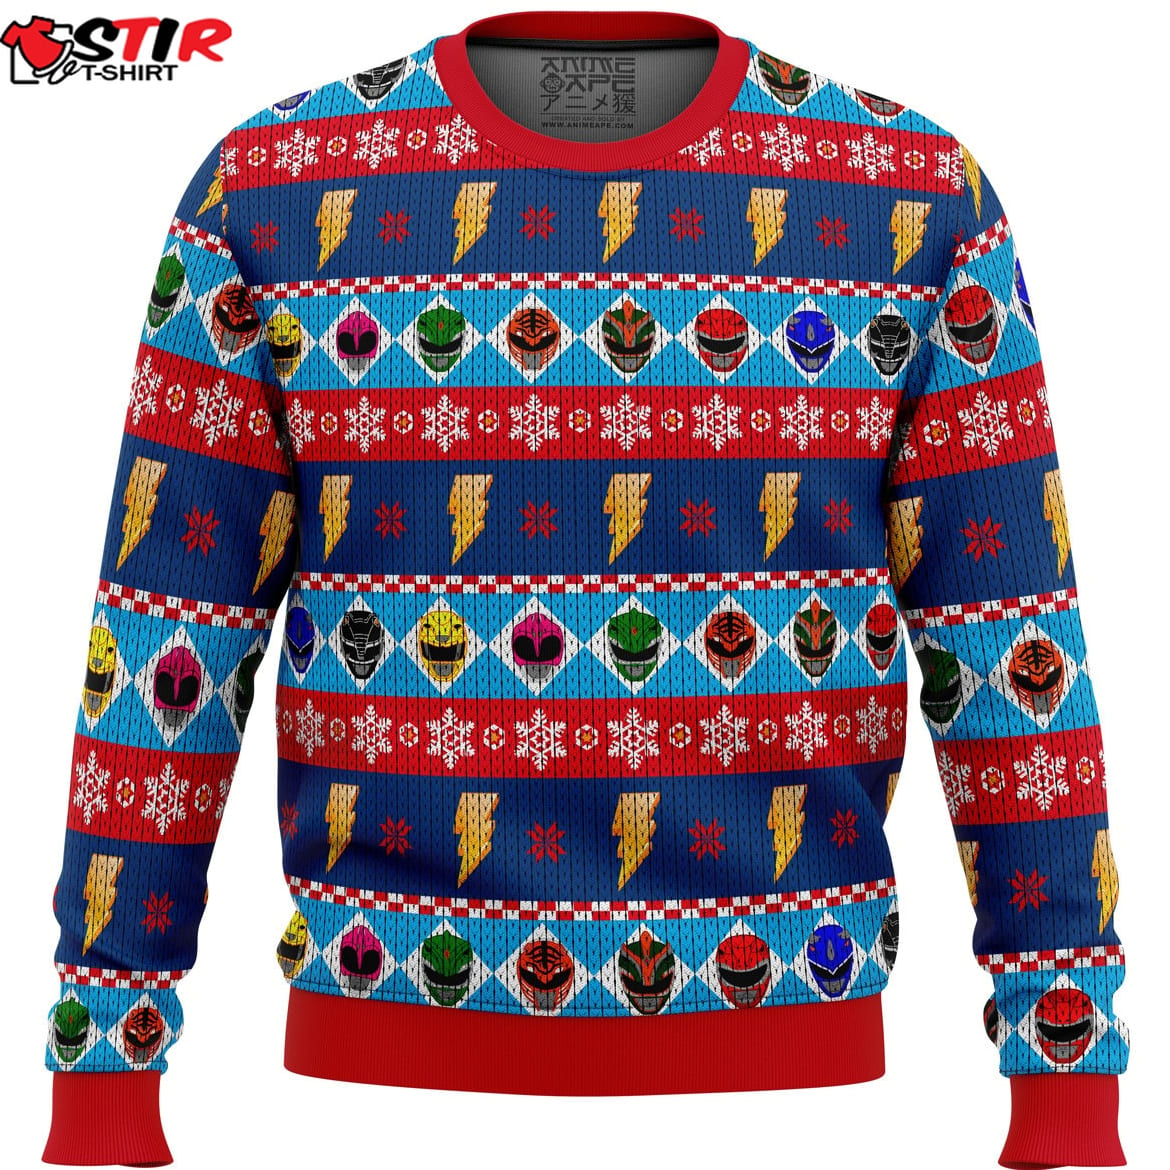 Mighty Helmets Power Rangers Ugly Christmas Sweater Stirtshirt